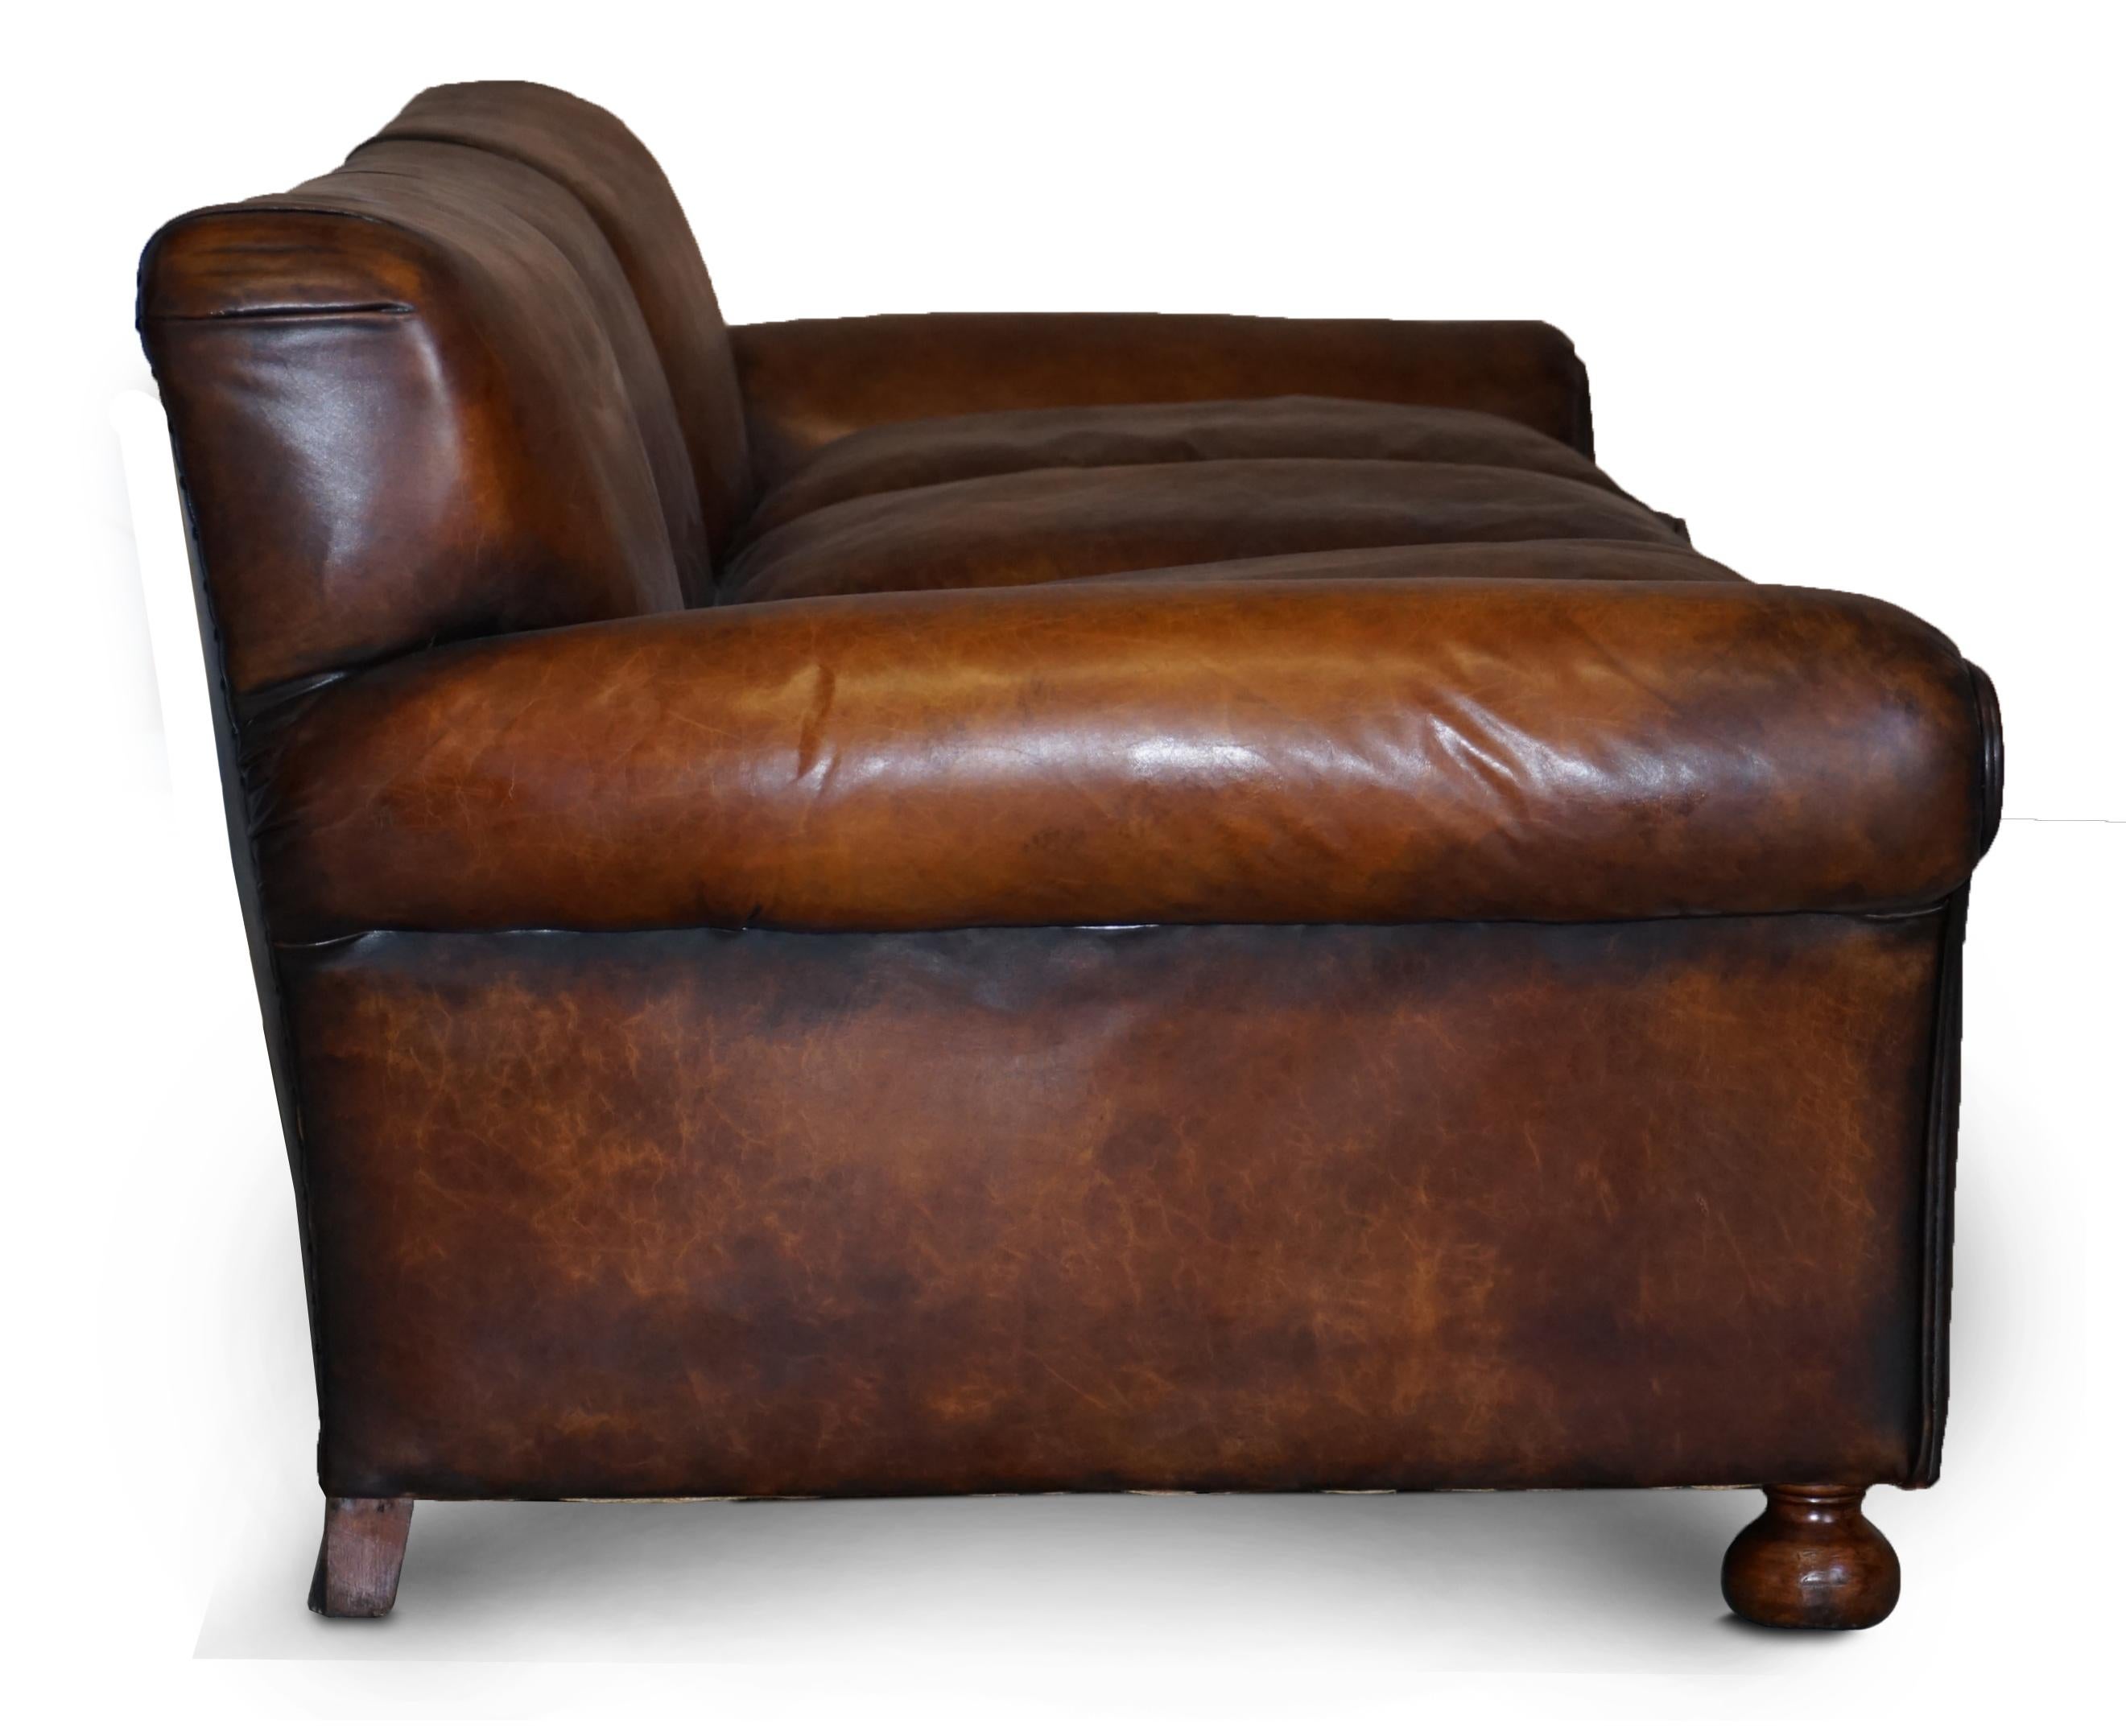 Restored Hand Dyed Brown Leather Antique Victorian 3-4 Seat Sofa Feather Seats For Sale 8